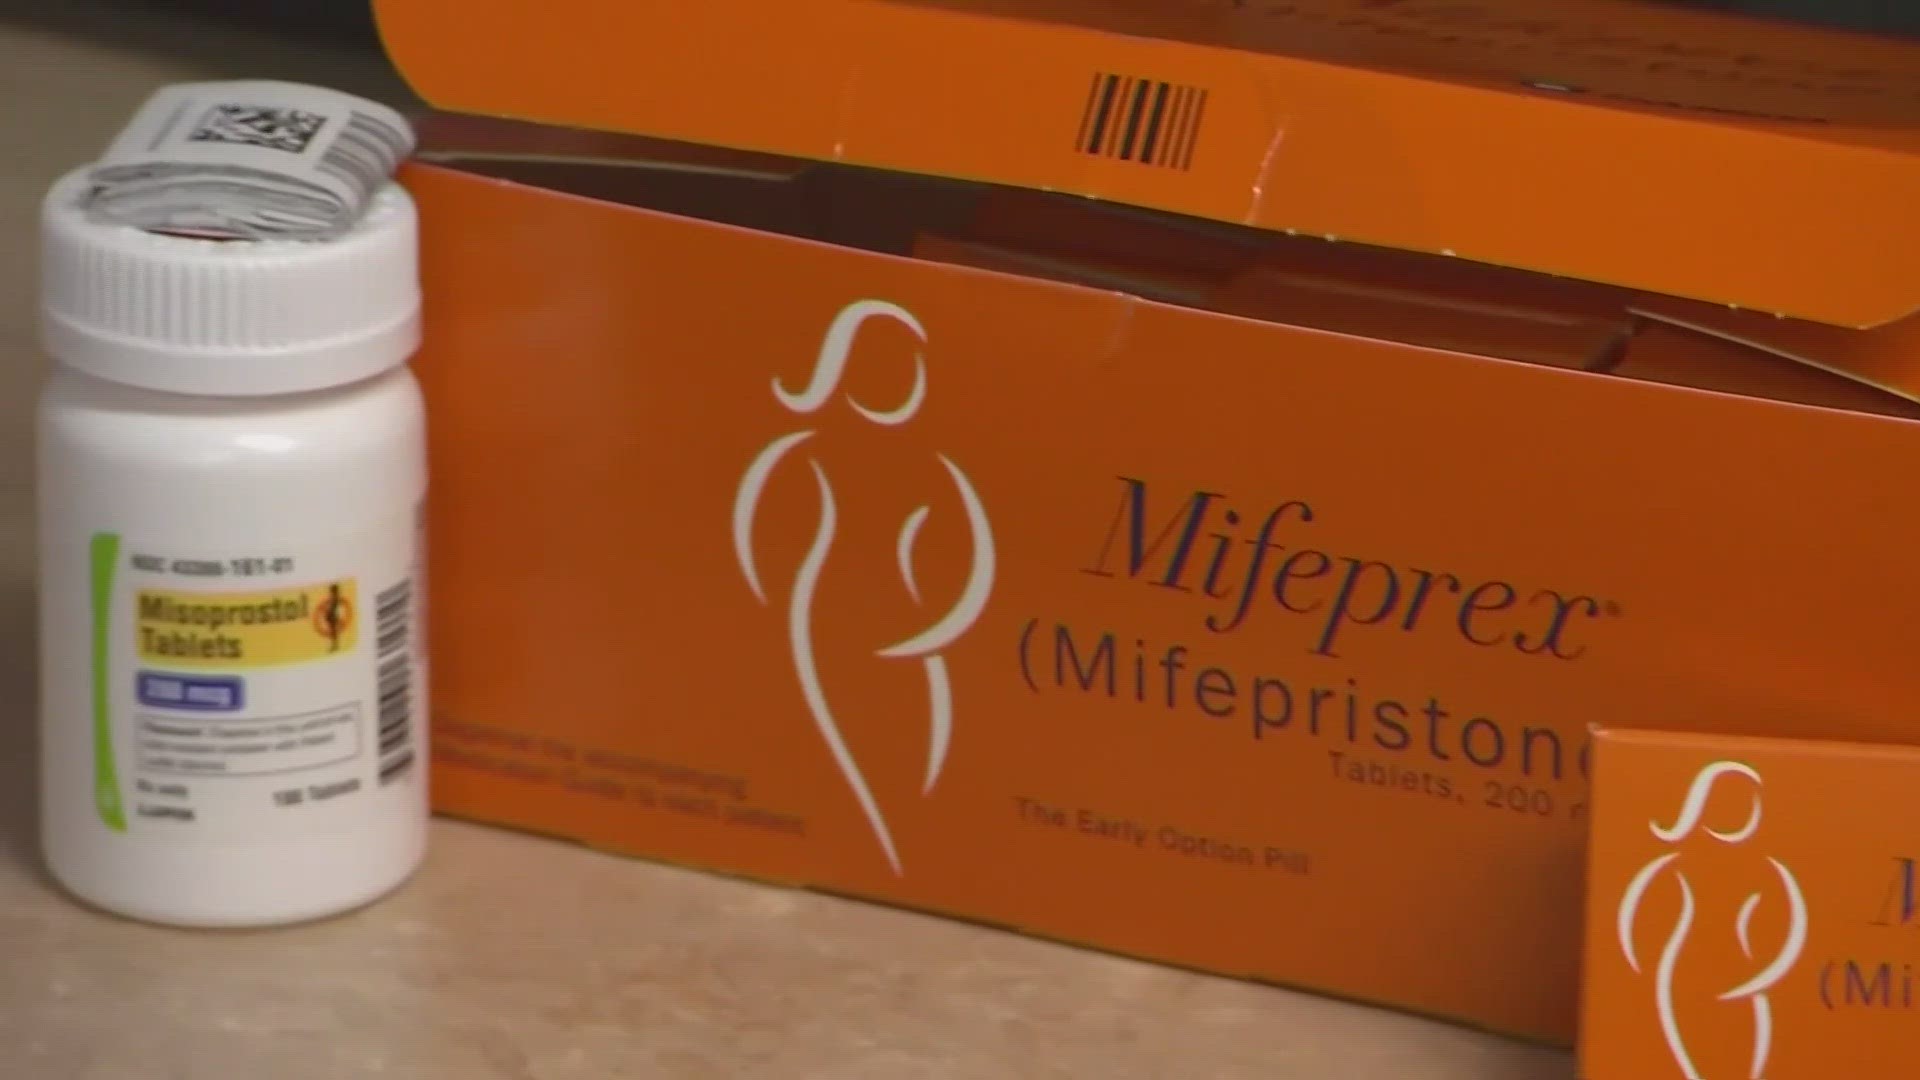 On Friday, a federal judge in Texas ordered a hold on the federal approval of Mifepristone. A federal judge in Washington issued a competing ruling.